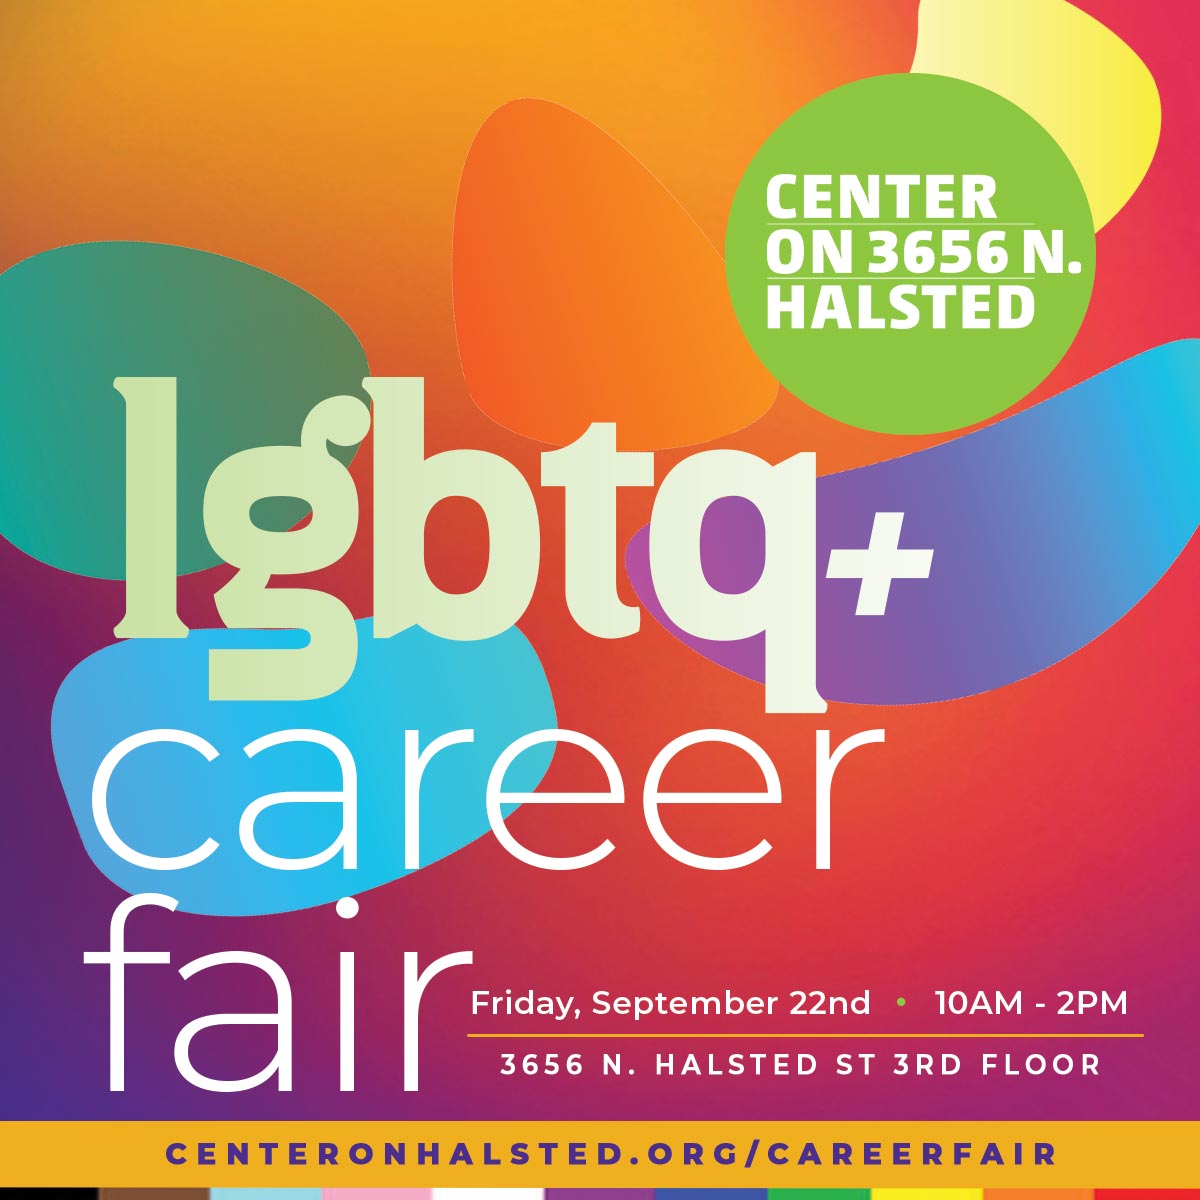 Rainbow colored blobs on a red to orange gradient background. Text on image reads "Center on 3656 N Halsted. LGBTQ+ career fair. Friday, September 22. 10am - 2pm. 3656 N Halsted St, 3rd Floor. Centeronhalsted.org/careerfair"